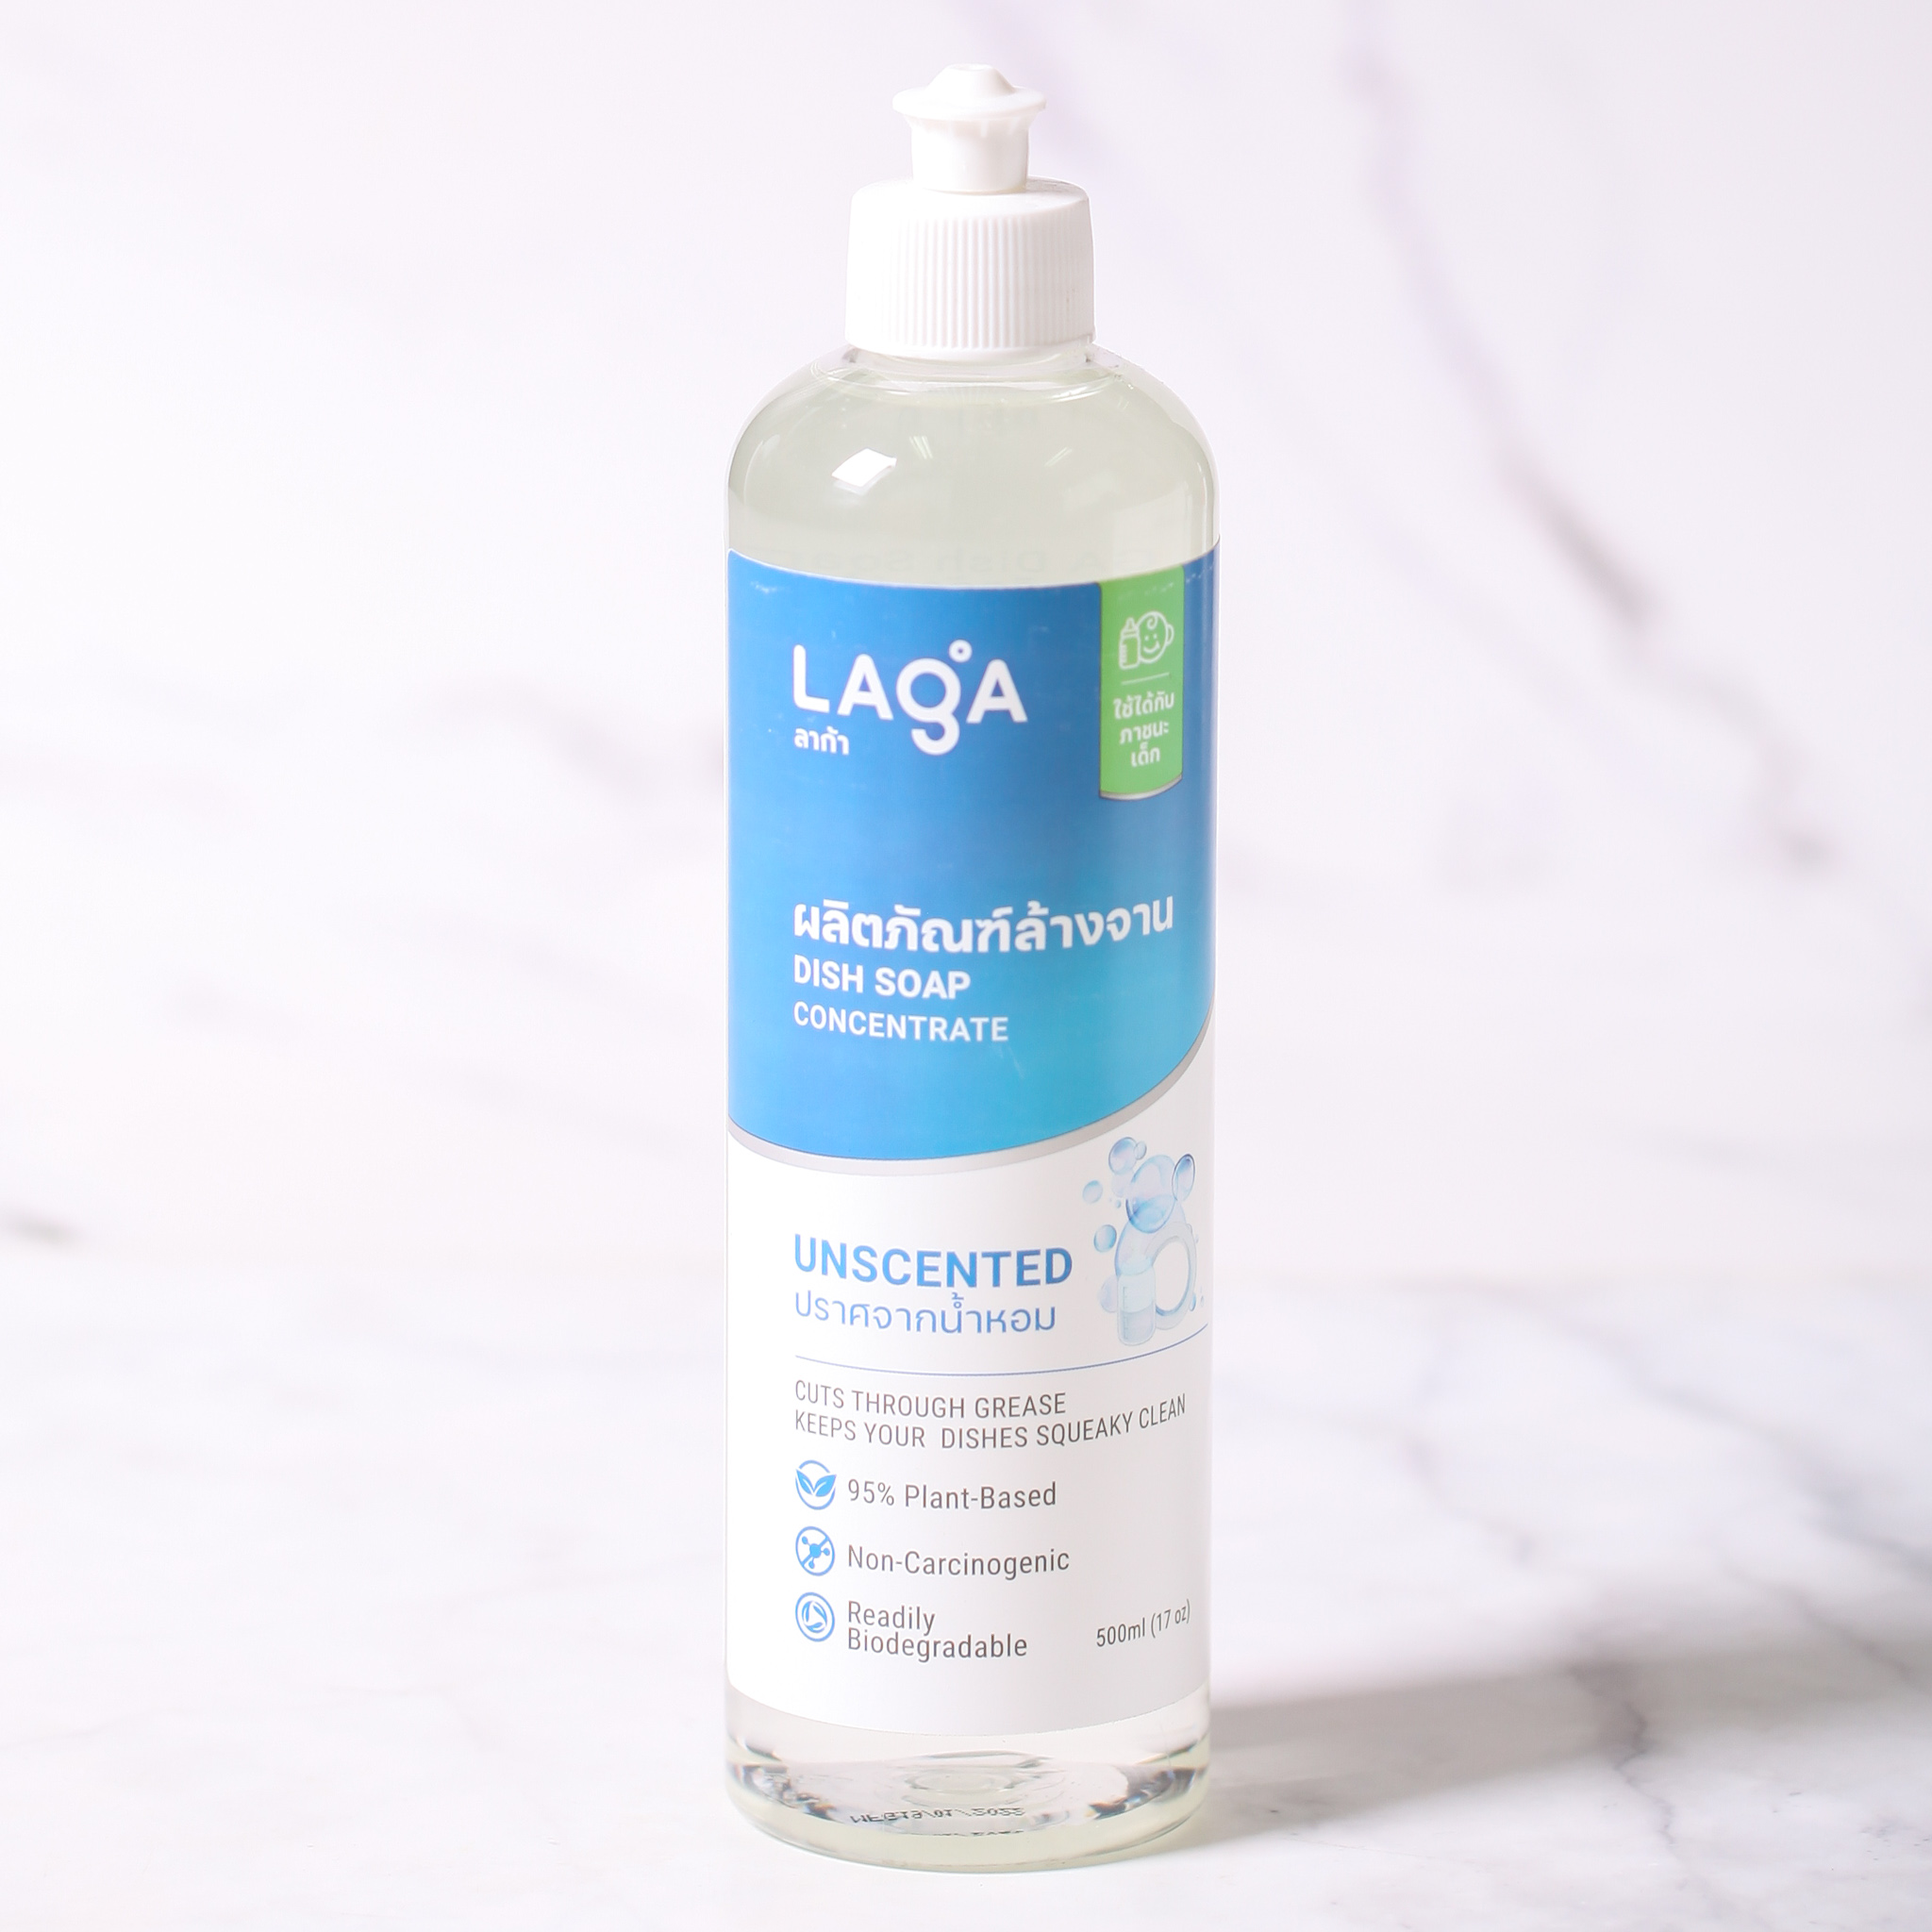 LAGA Natural Dish Soap Concentrate, Unscented